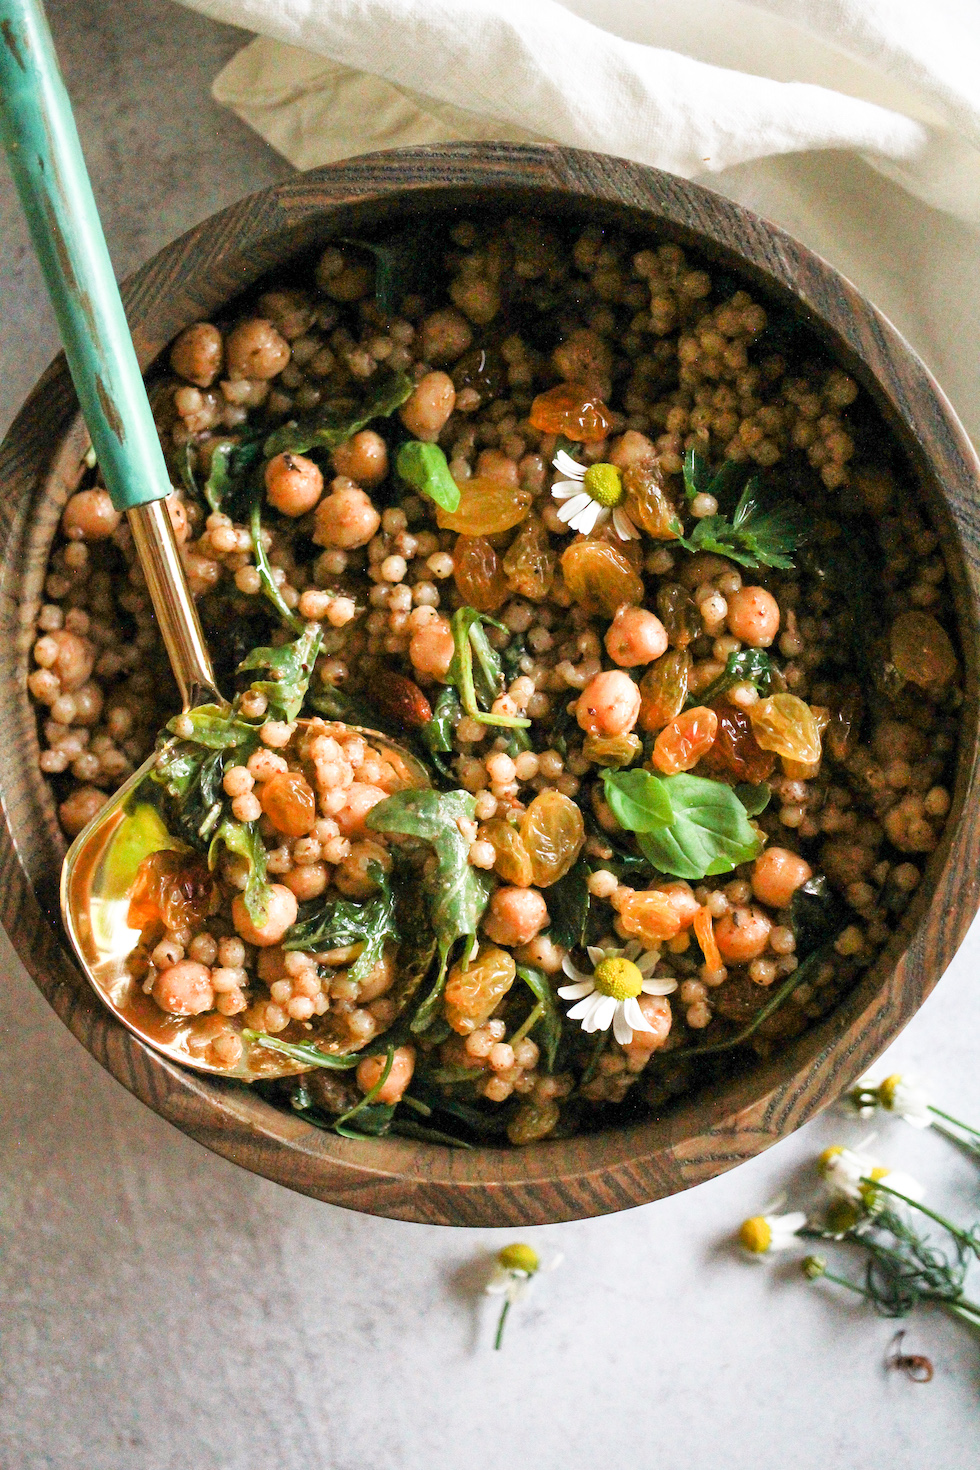 Israeli couscous salad in wooden bowl with blue and gold spoon.